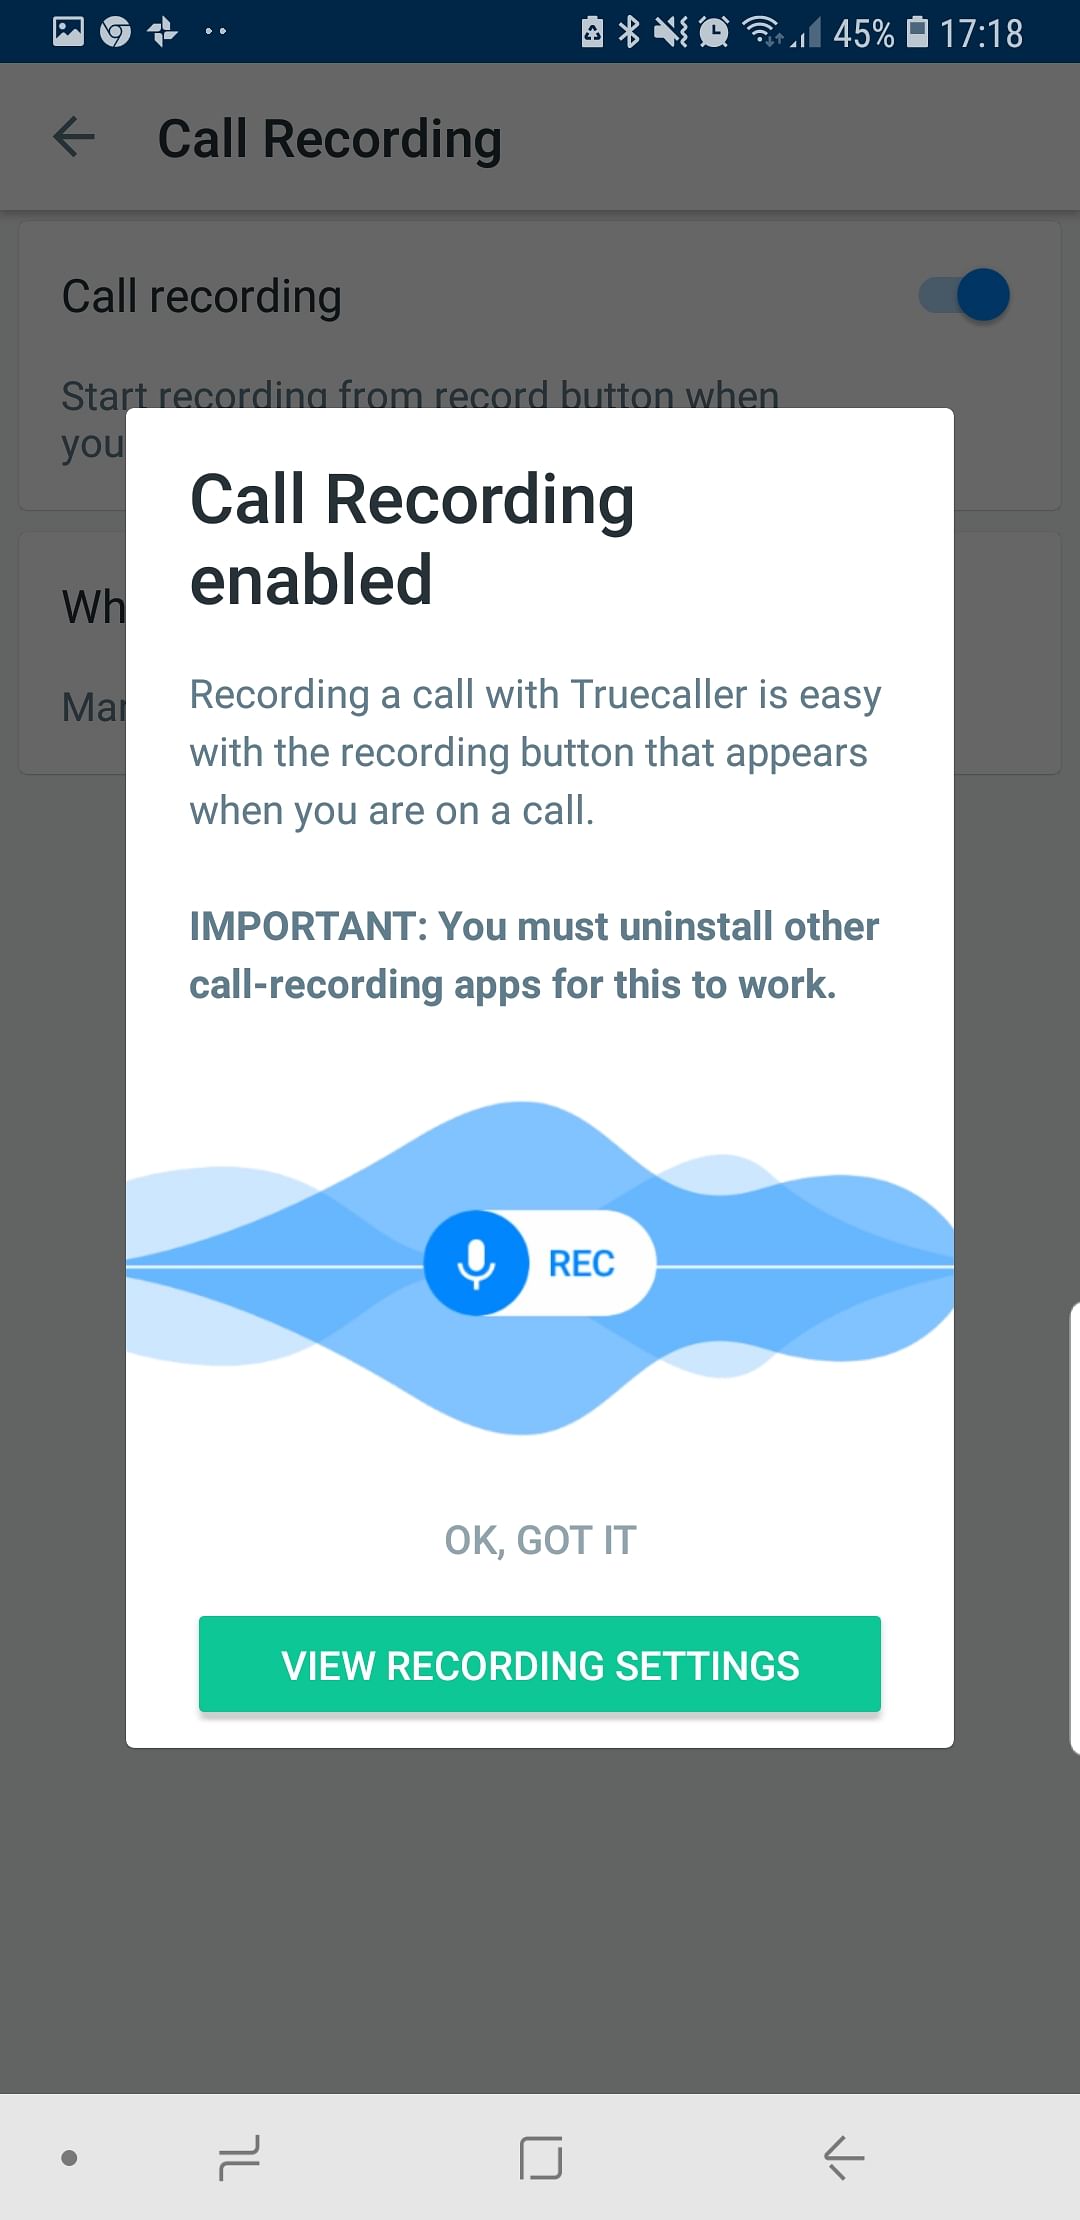 Truecaller has released a new call recording feature for premium users to record phone calls from within the app.